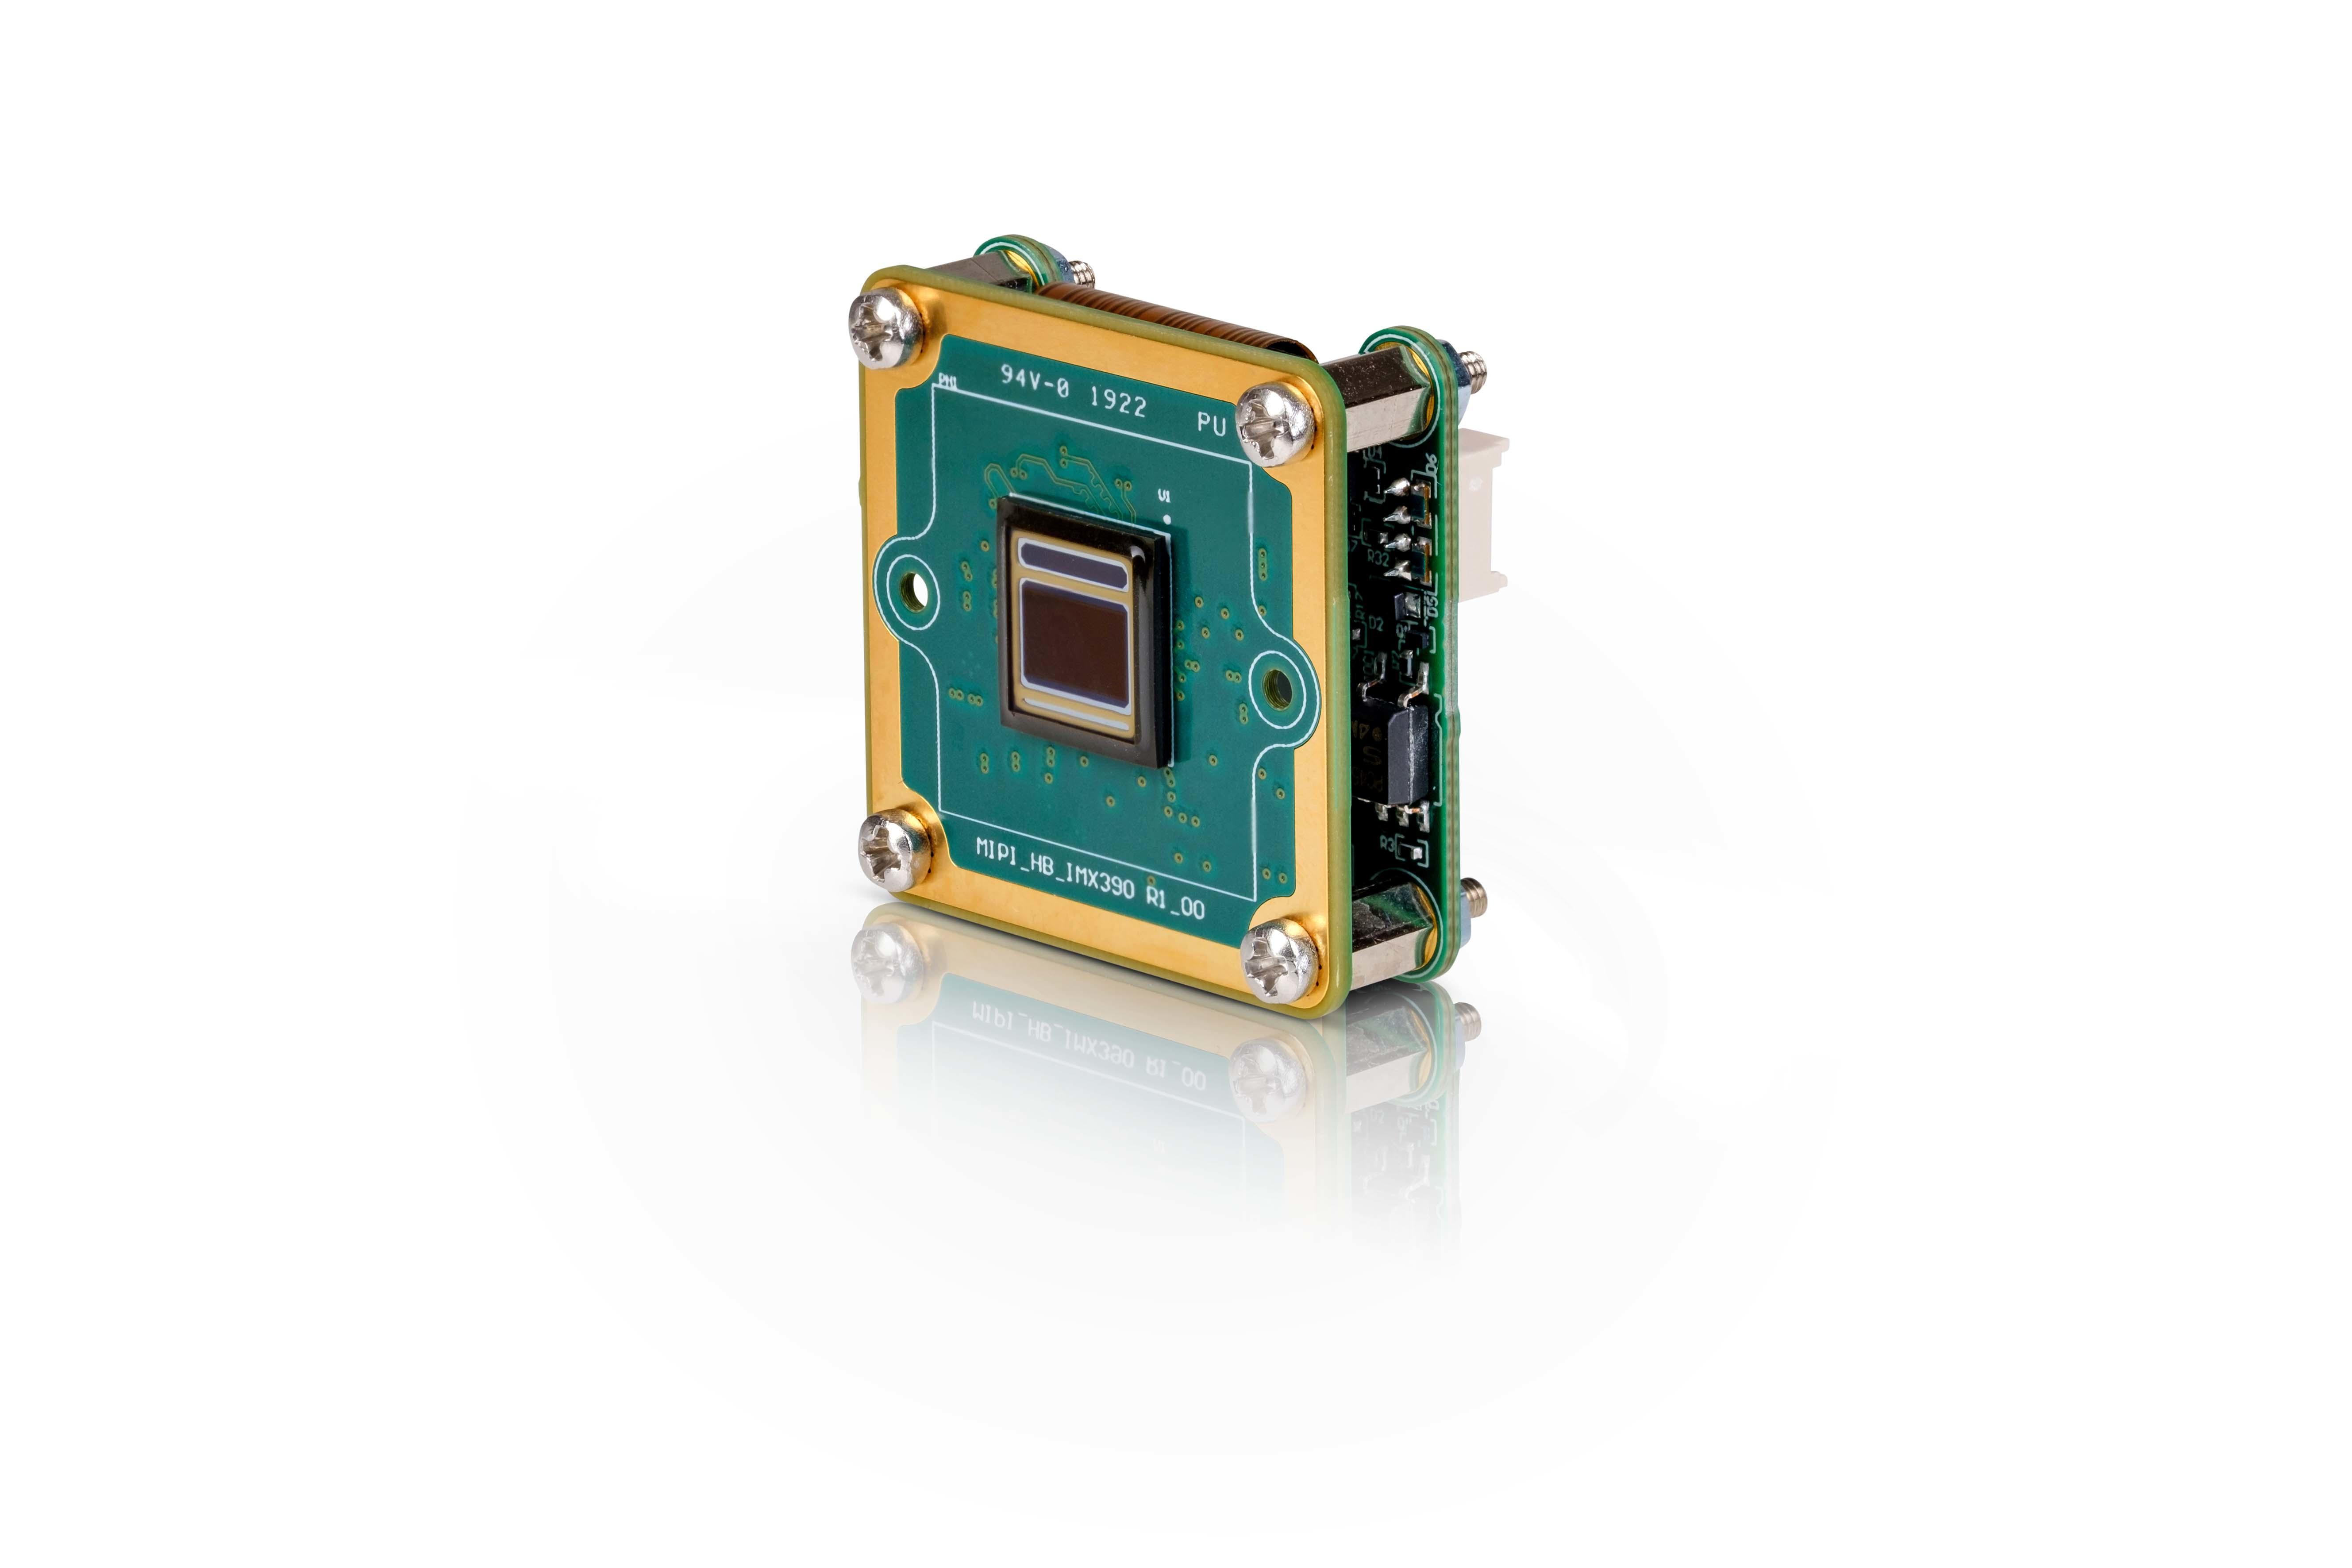 The Imaging Source, 2.3MP 1/2.6" AR0234CS, Embedded Board Camera